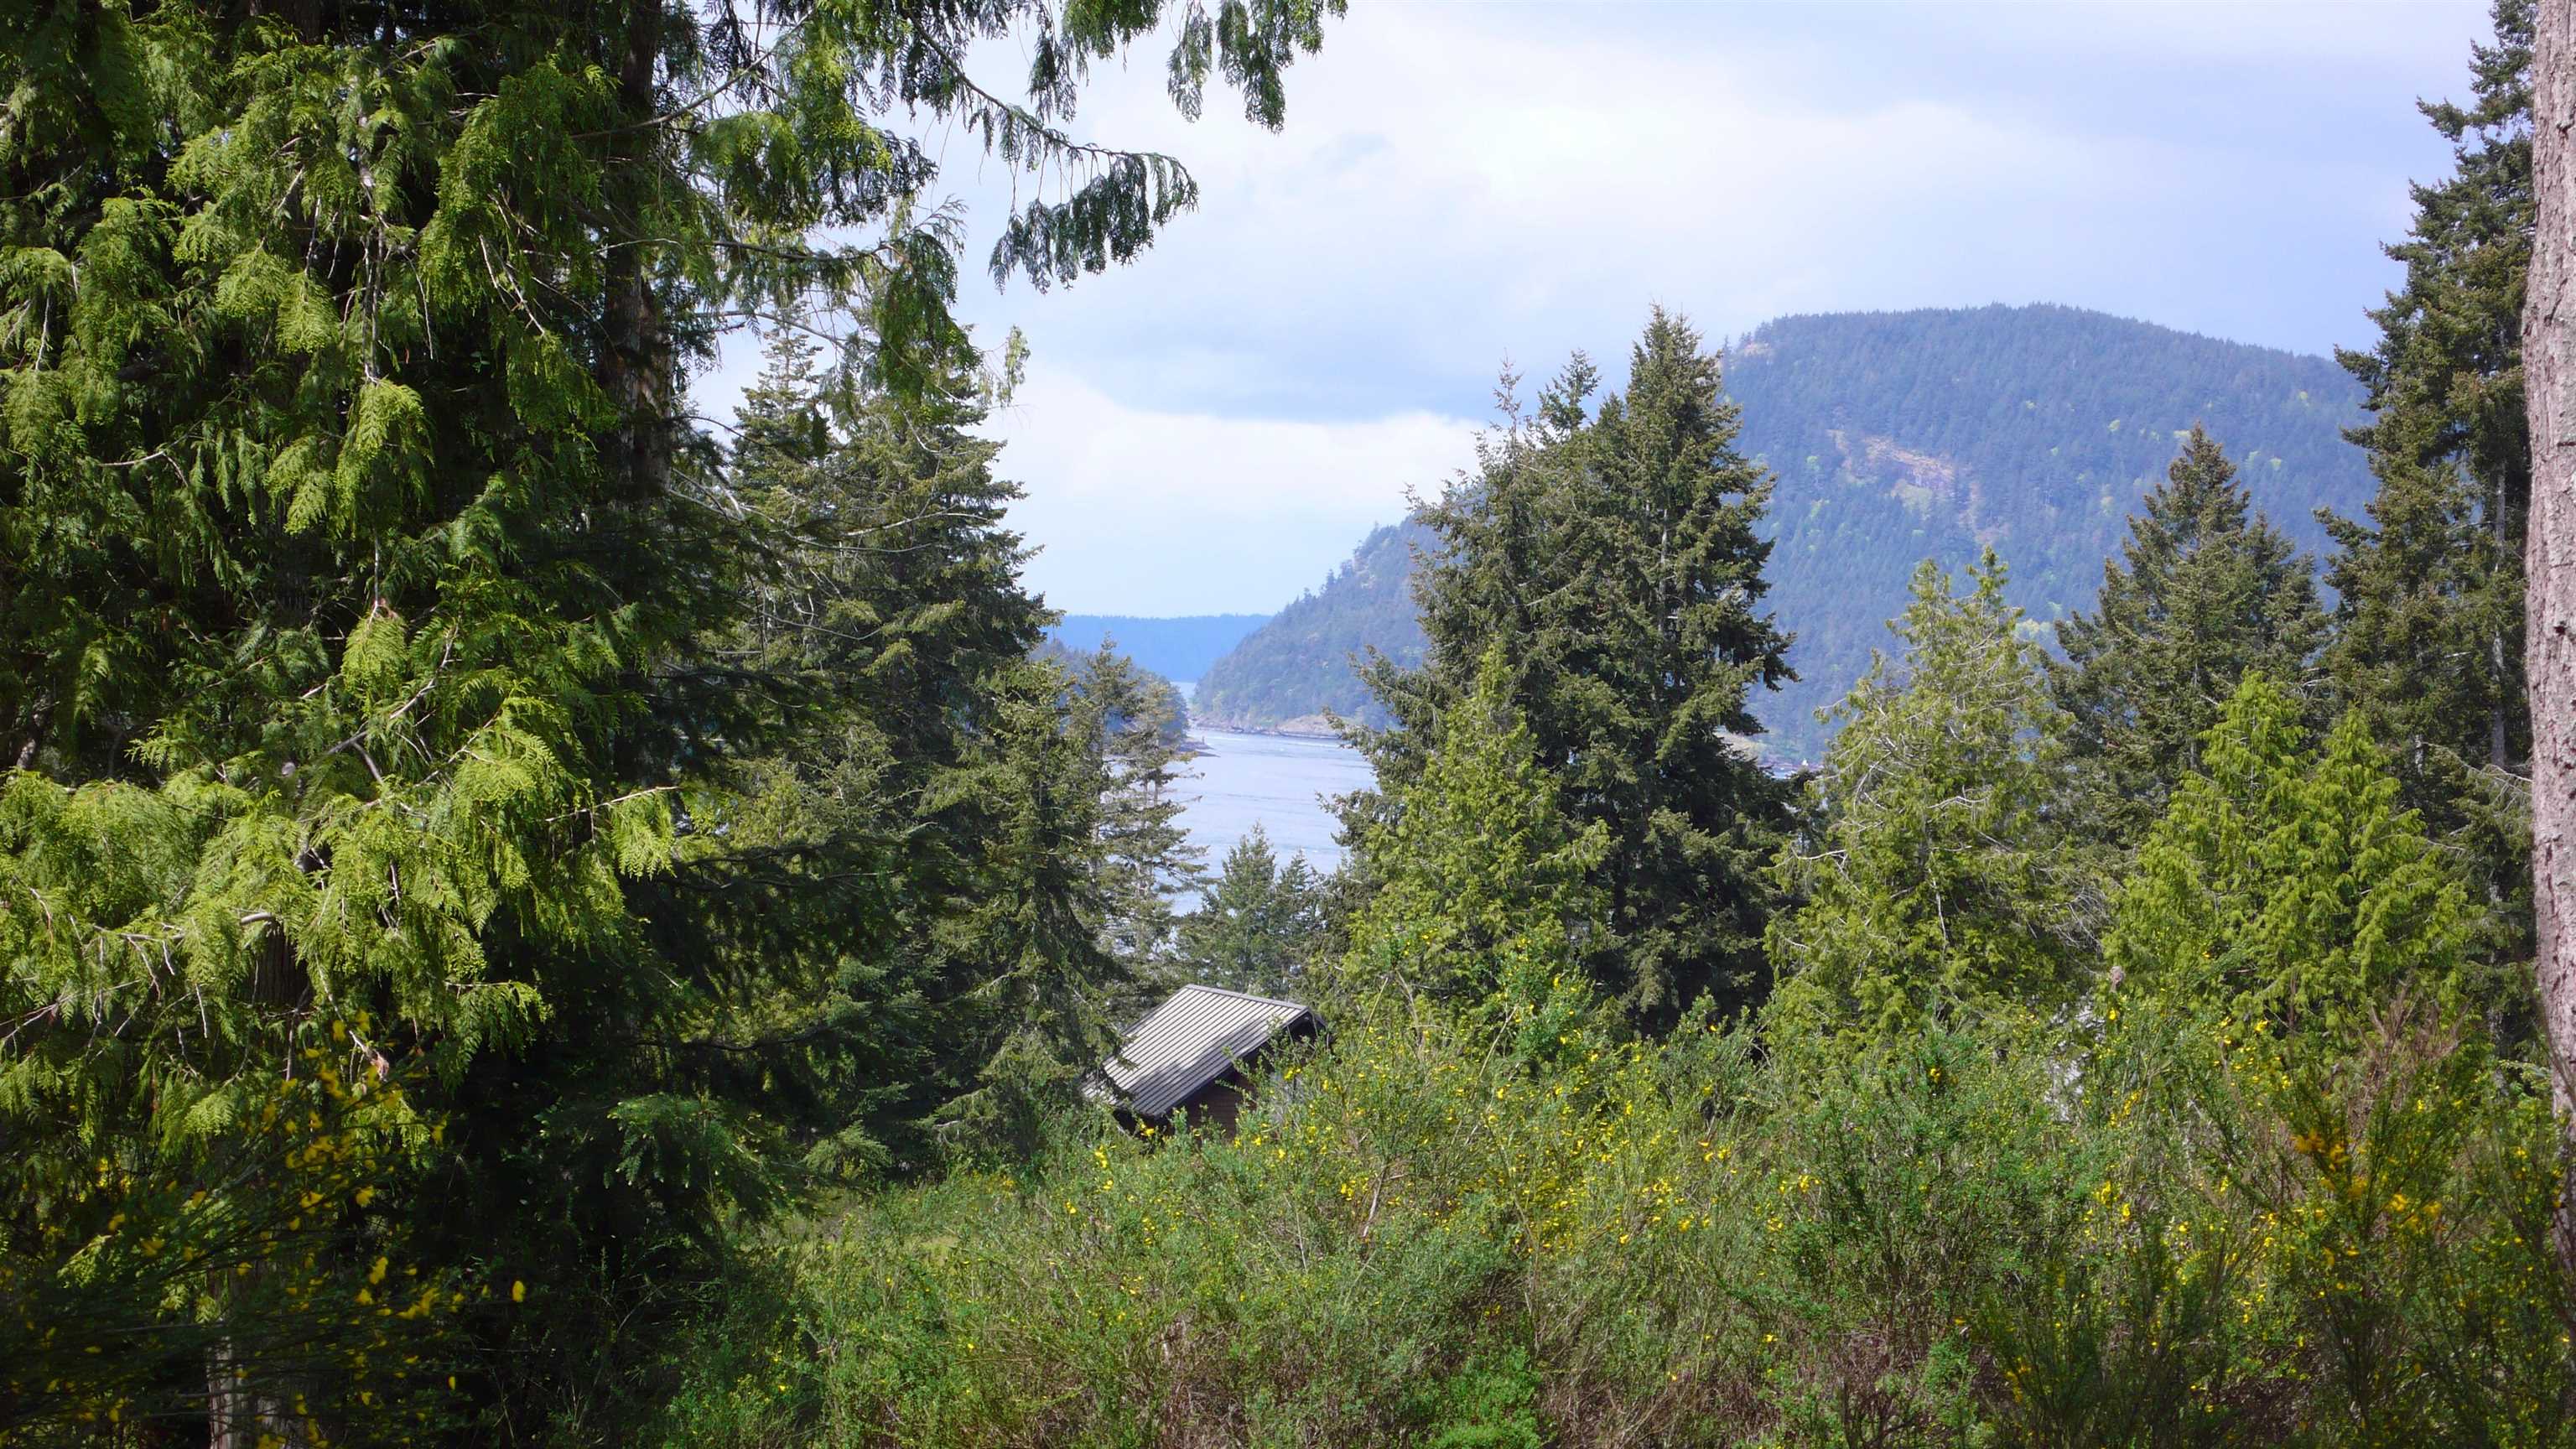 Listing image of 415 CAMPBELL BAY ROAD